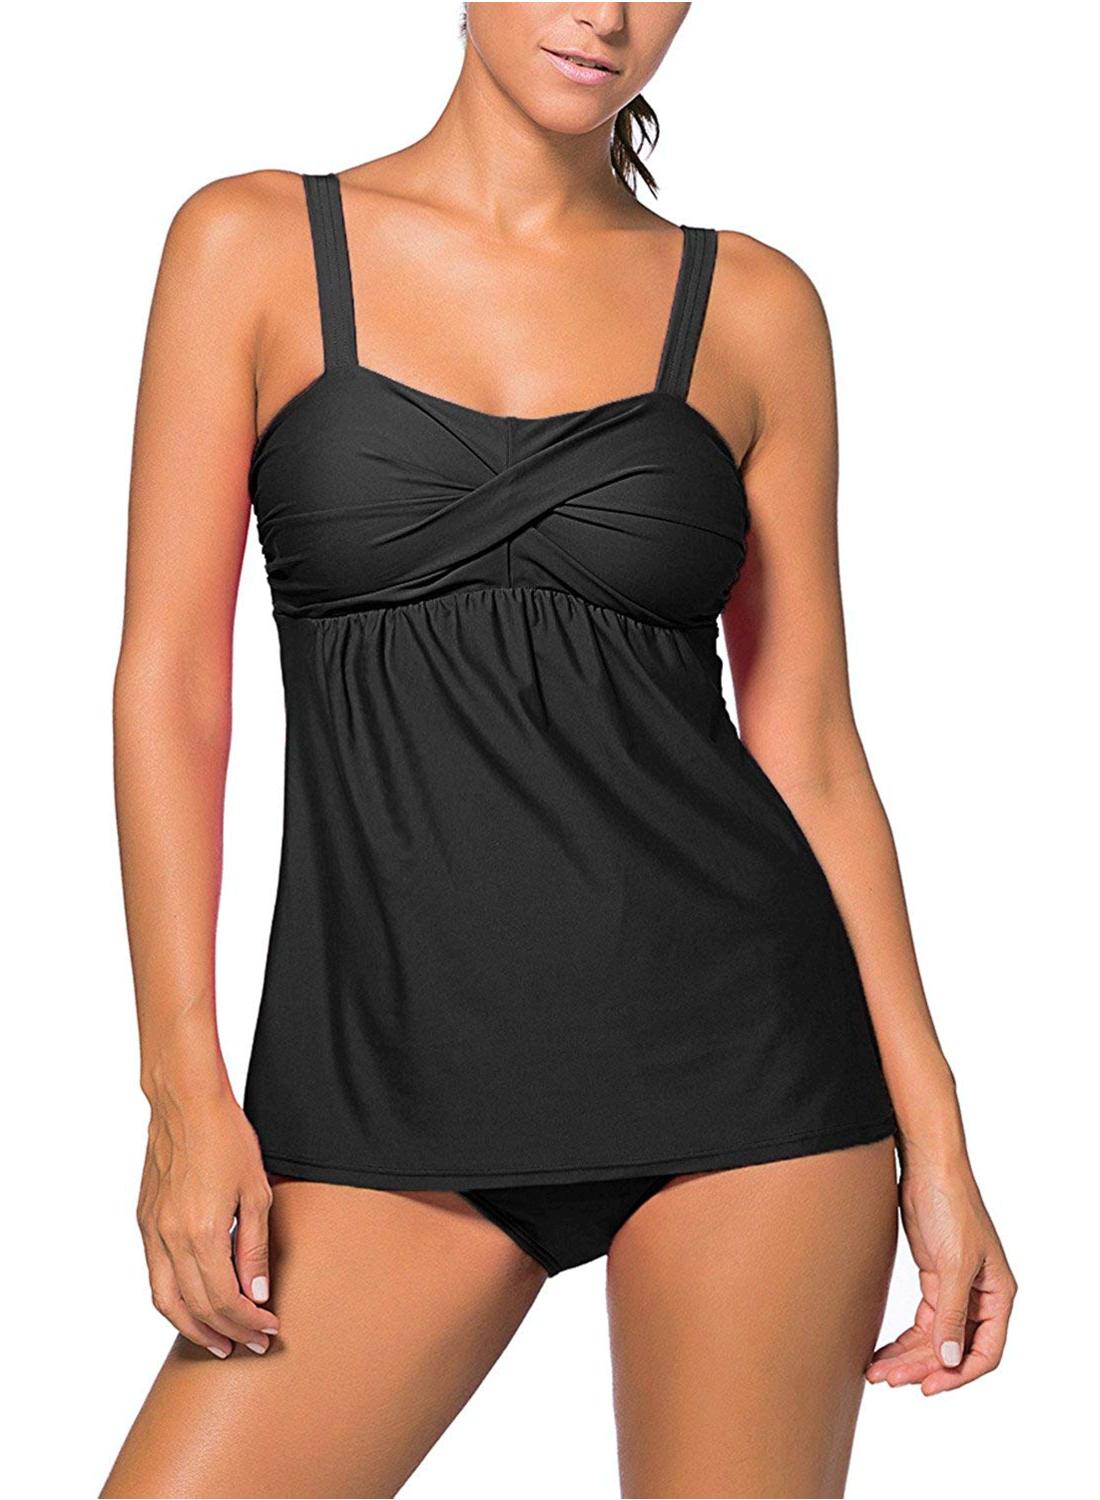 Actloe Women's Two Pieces Swimwear Ruched Tankini Top with, Black, Size ...